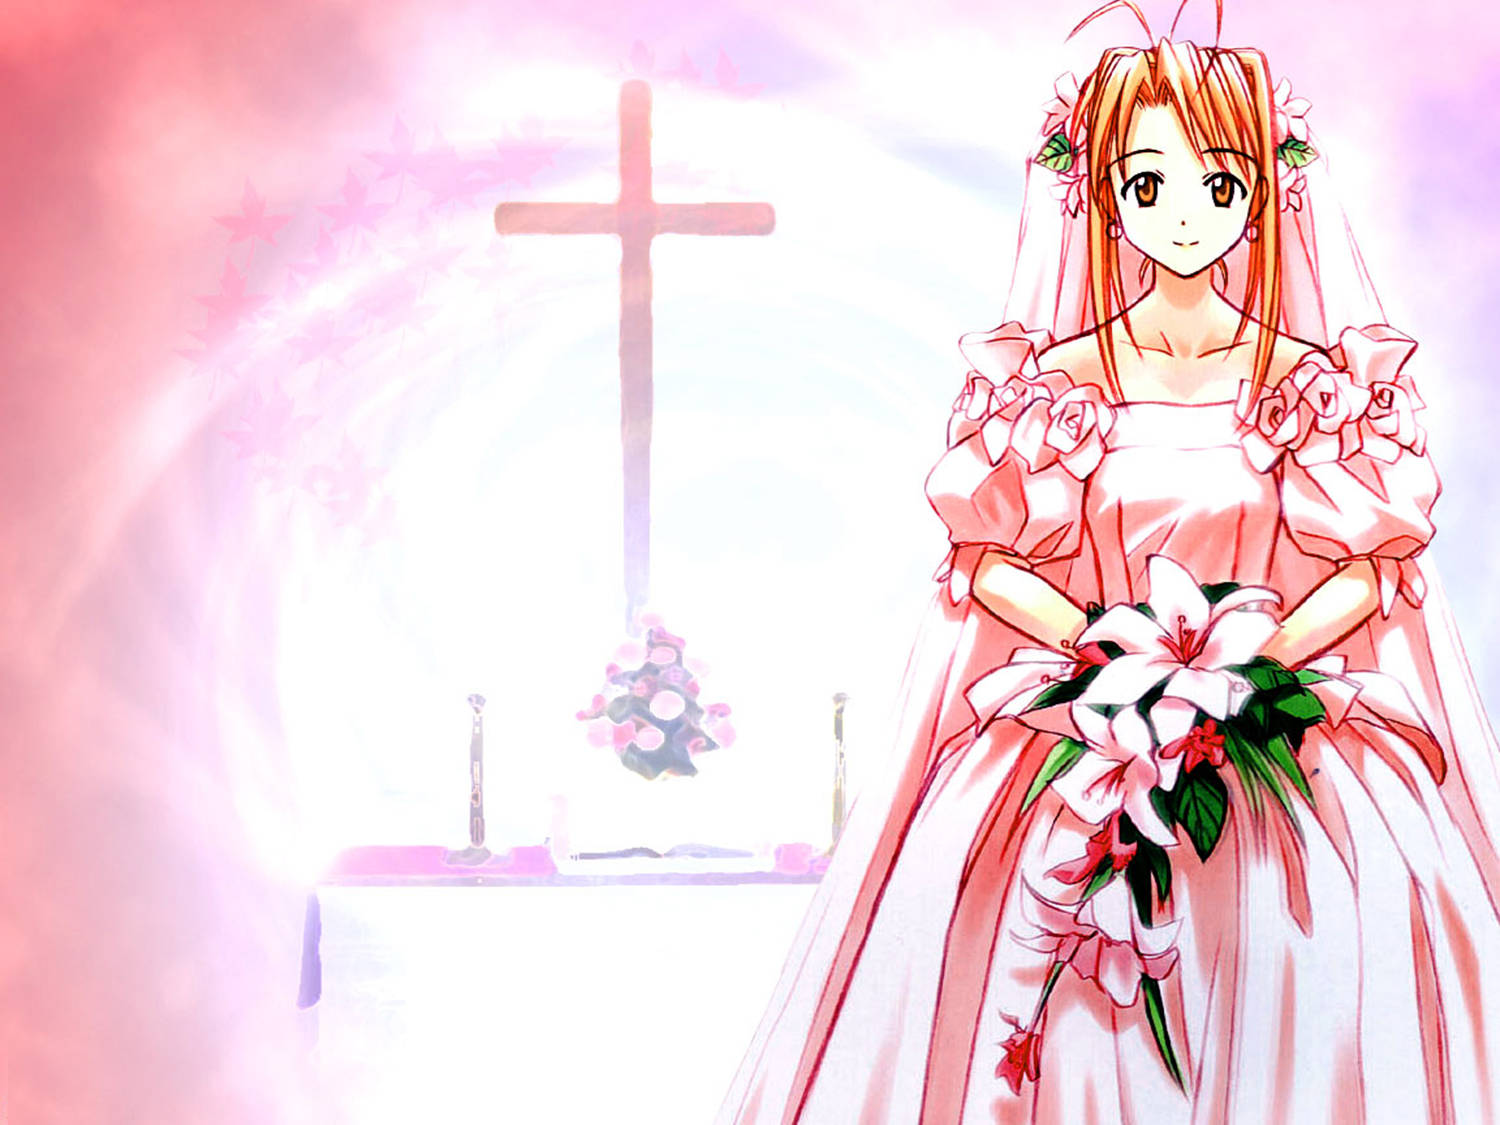 Naru In A Vibrant Bridal Outfit From Love Hina Anime Series Background